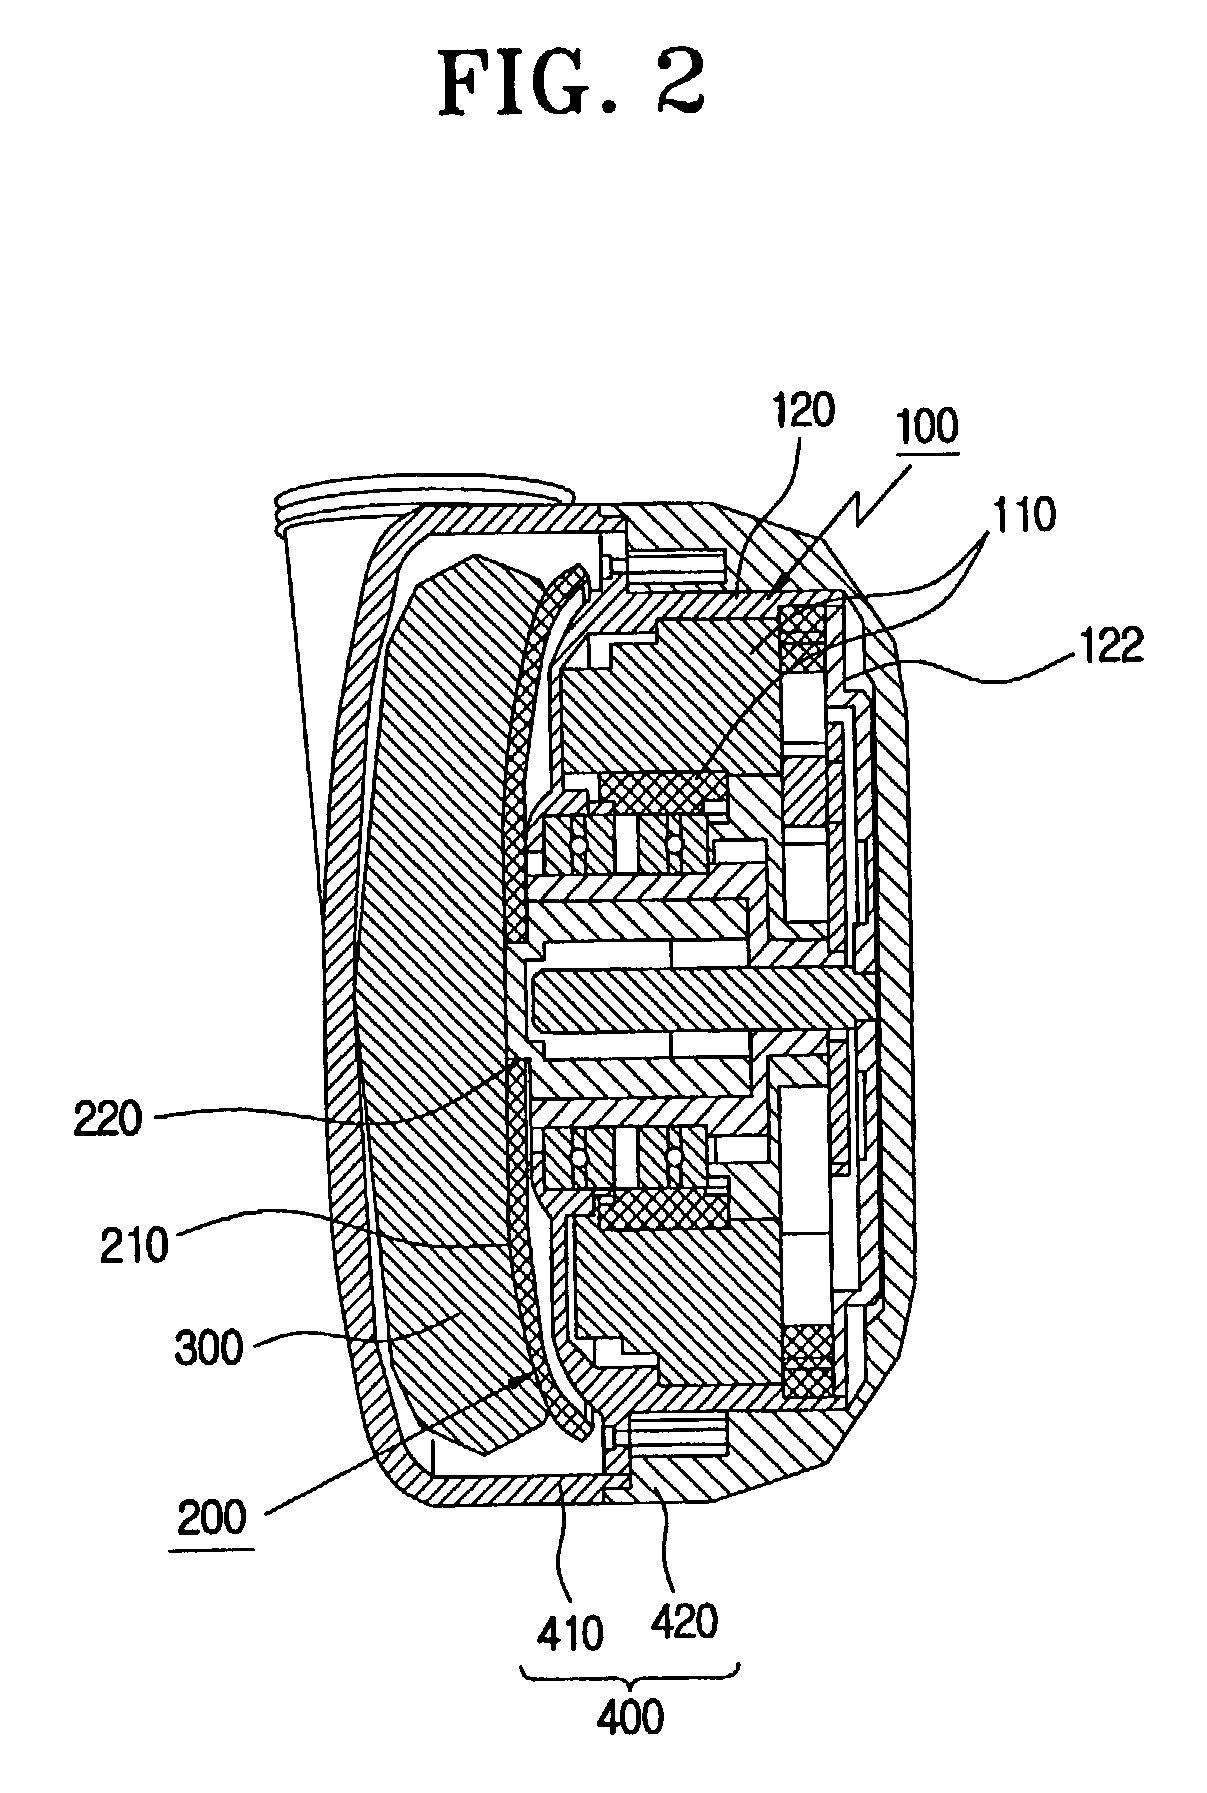 Implantable left ventricular assist device with cylindrical cam